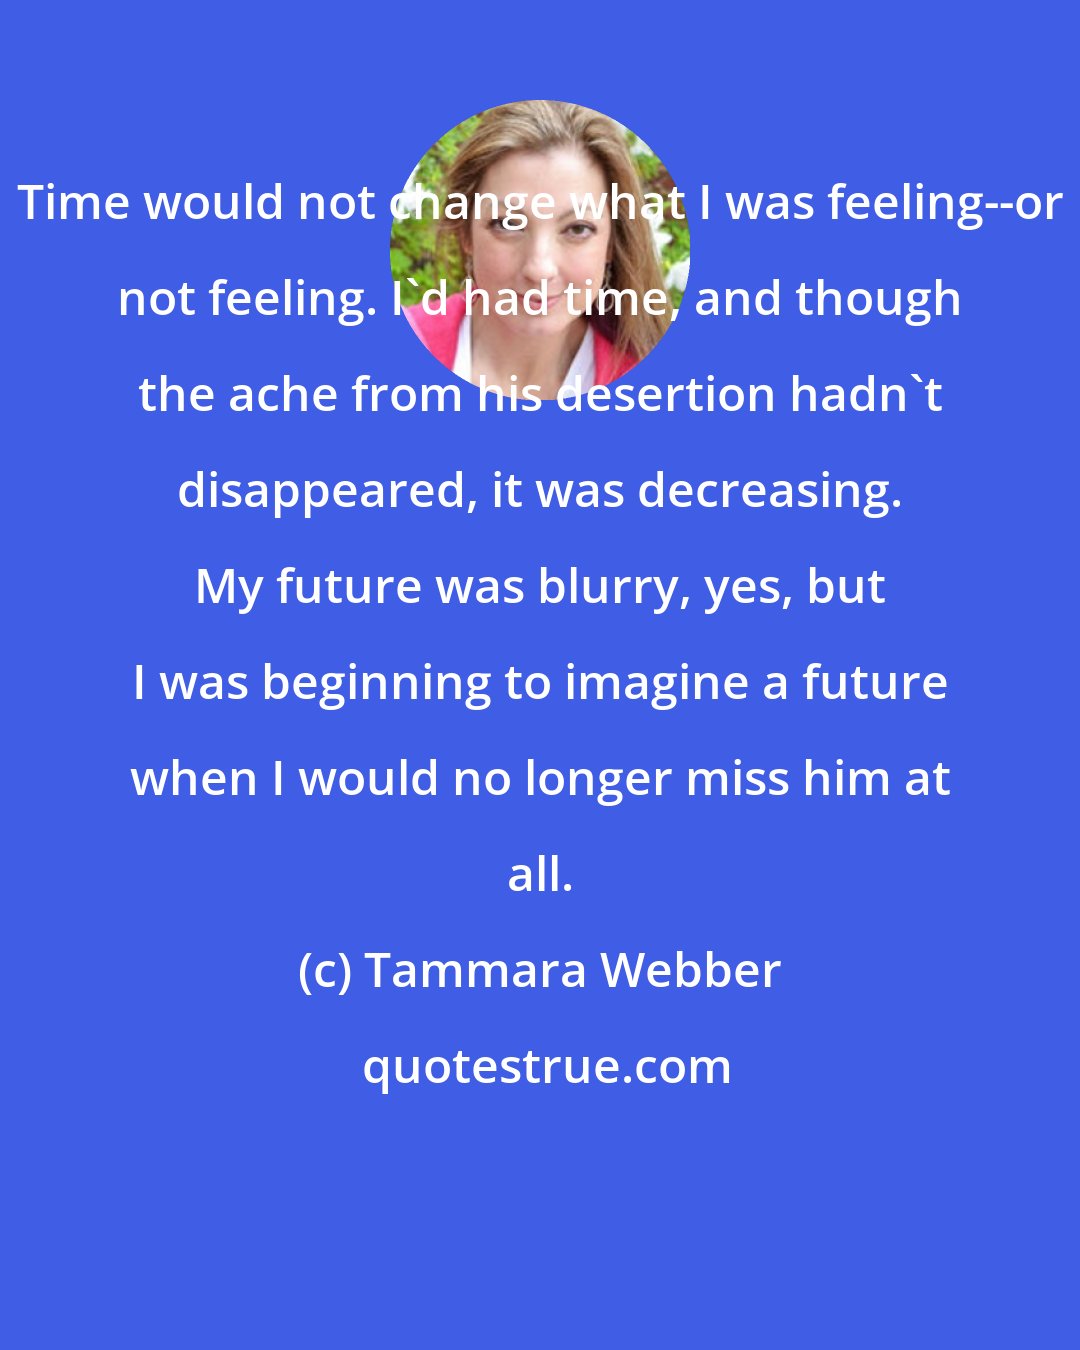 Tammara Webber: Time would not change what I was feeling--or not feeling. I'd had time, and though the ache from his desertion hadn't disappeared, it was decreasing. My future was blurry, yes, but I was beginning to imagine a future when I would no longer miss him at all.